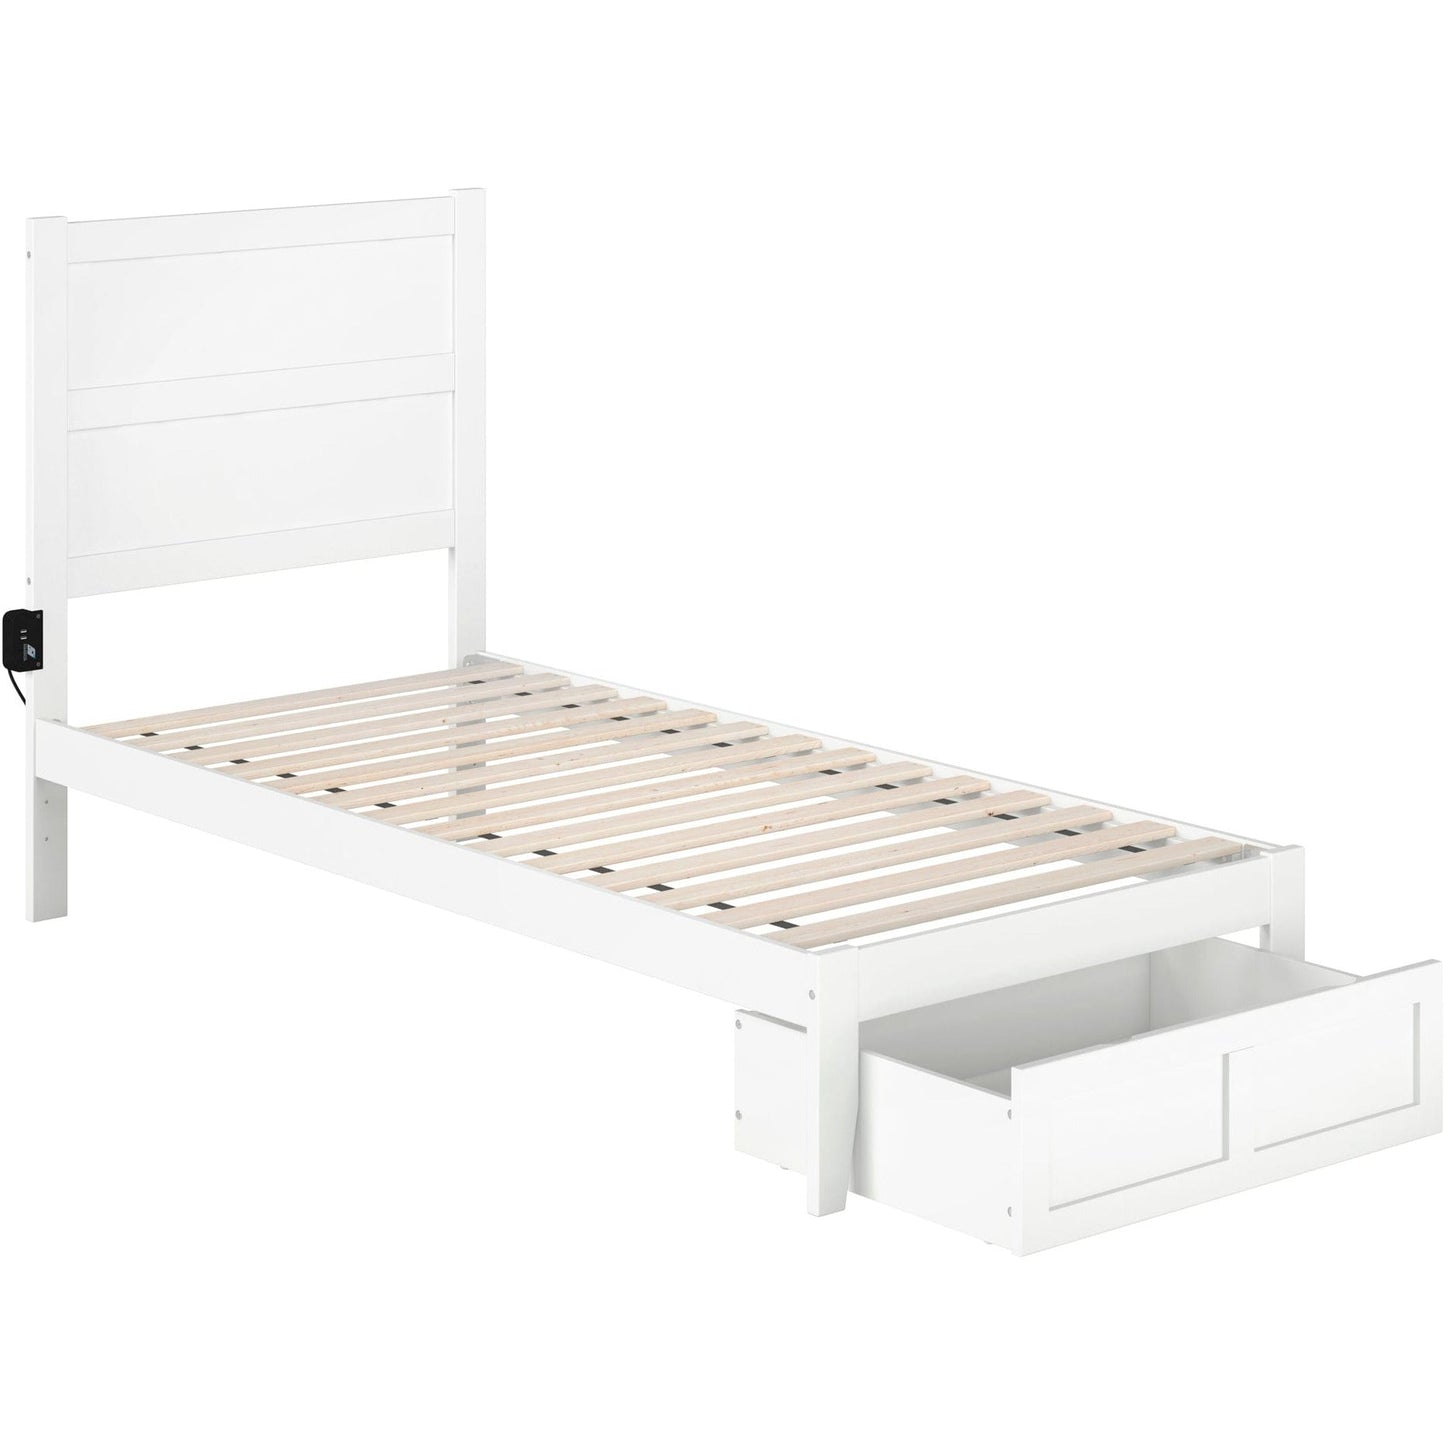 AFI Furnishings NoHo Twin Extra Long Bed with Foot Drawer in White AG9112412